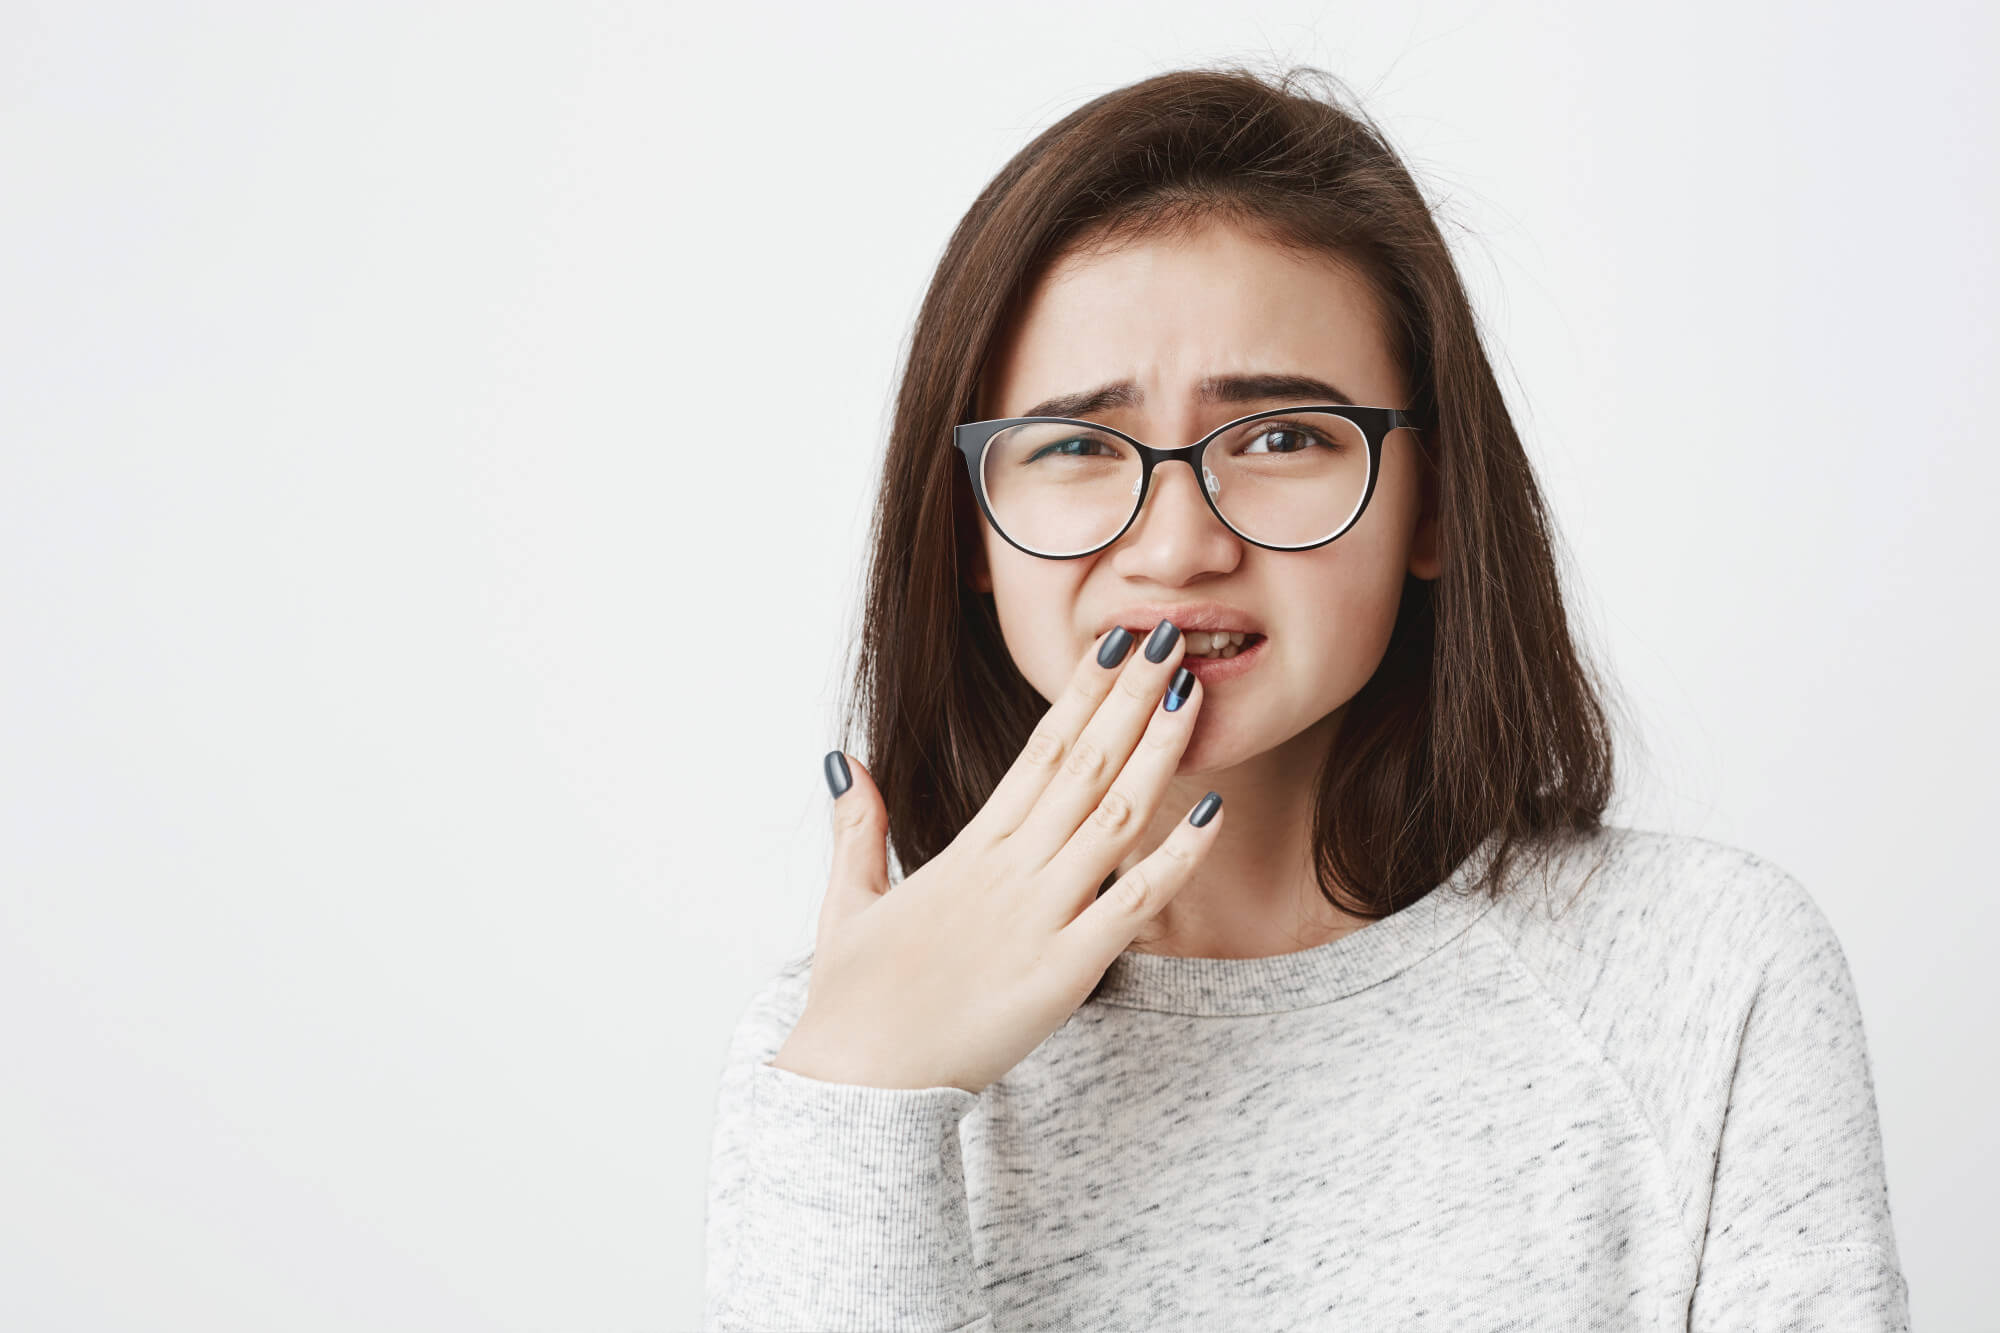 Young woman holding teeth in pain